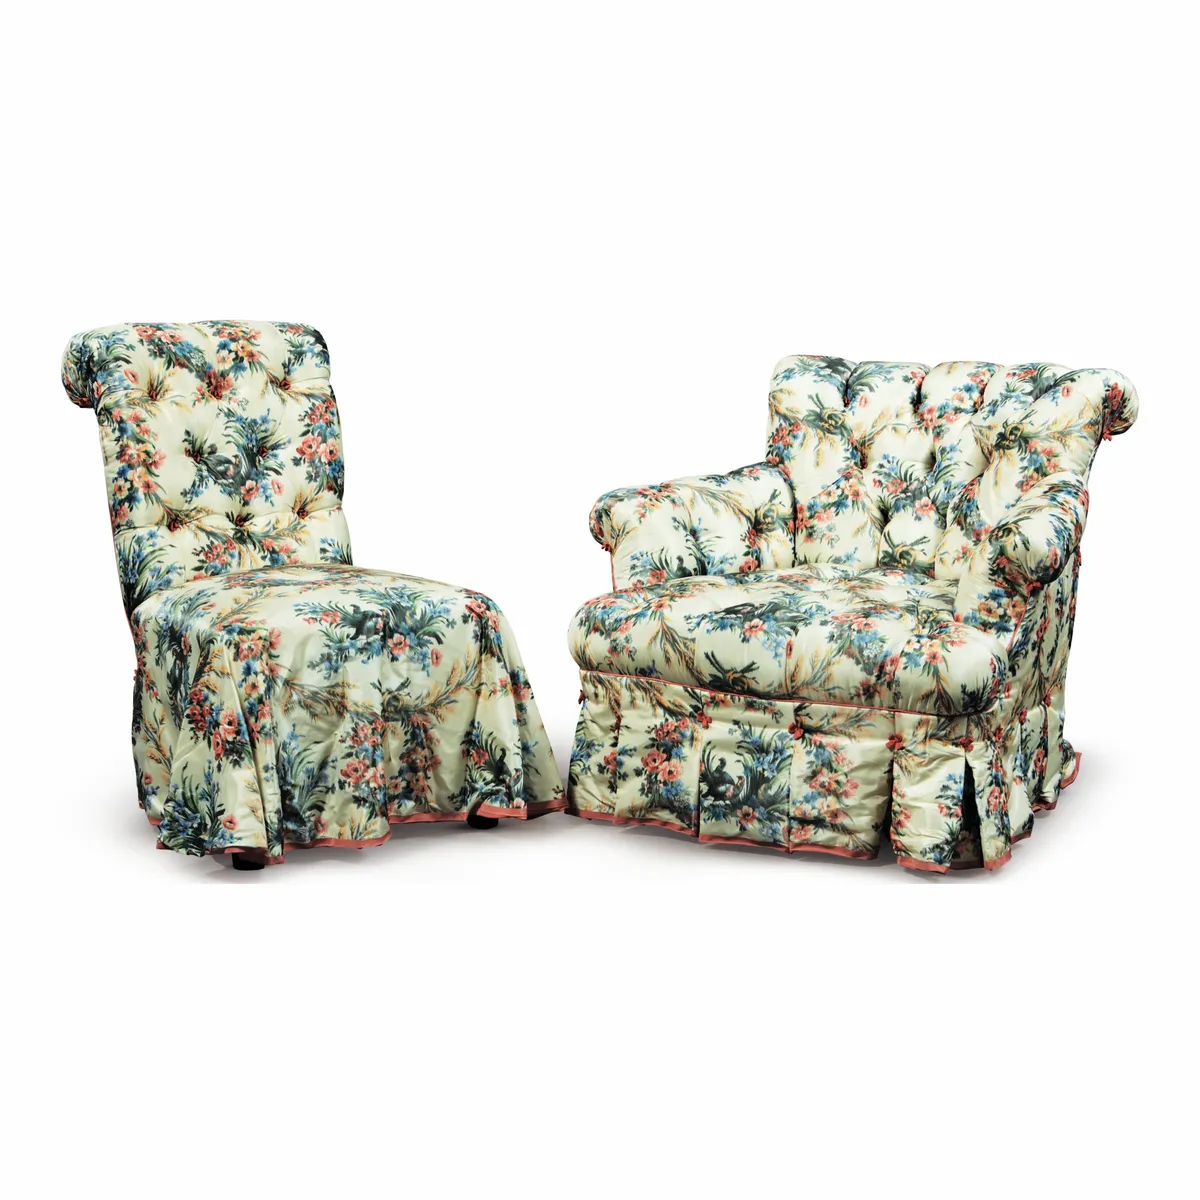 A chair in floral chintz once belonging to Mario Buatta, sold for $11,250 (along with an armchair) at Sotheby’s New York in January 2020.